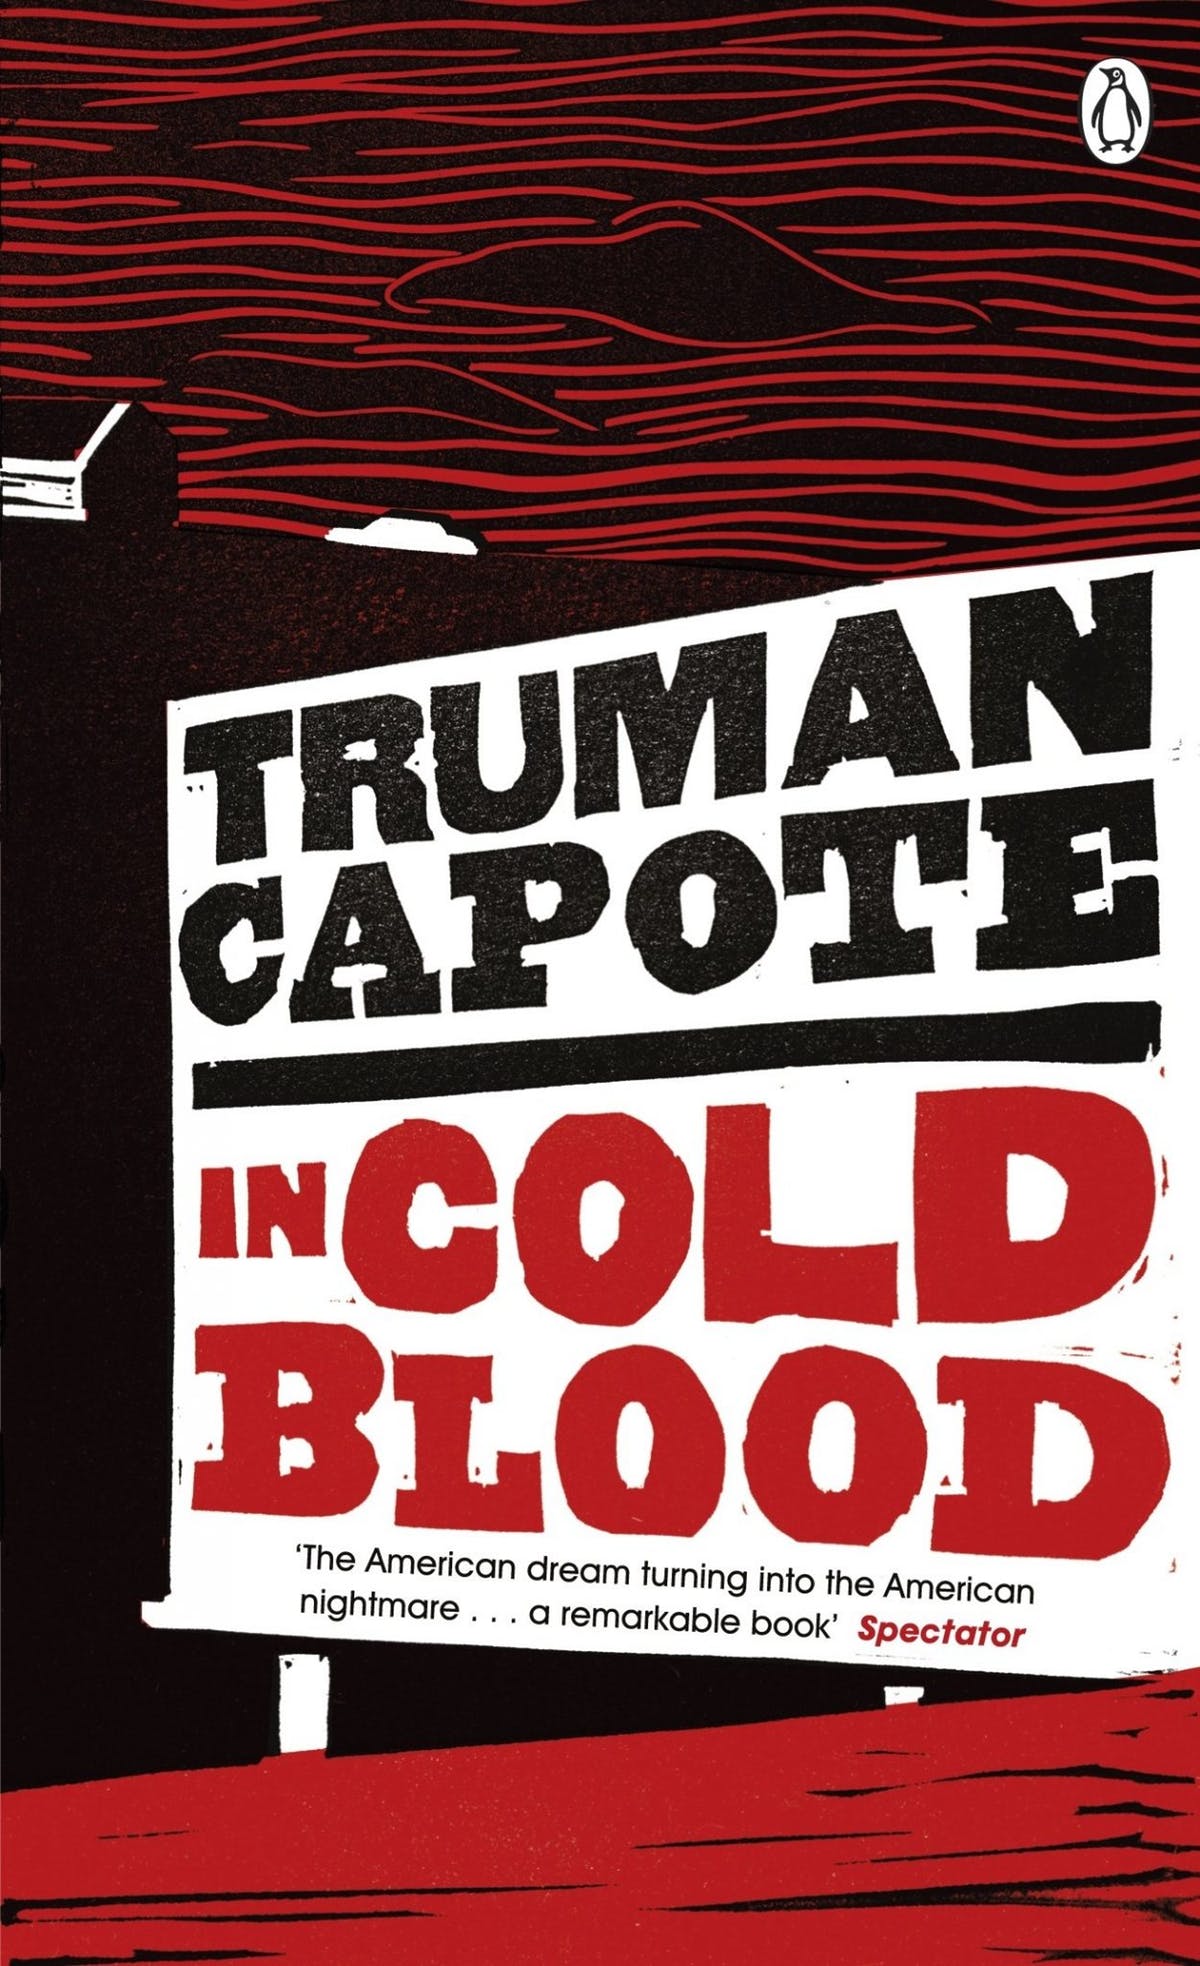 in-cold-blood-by-truman-capote